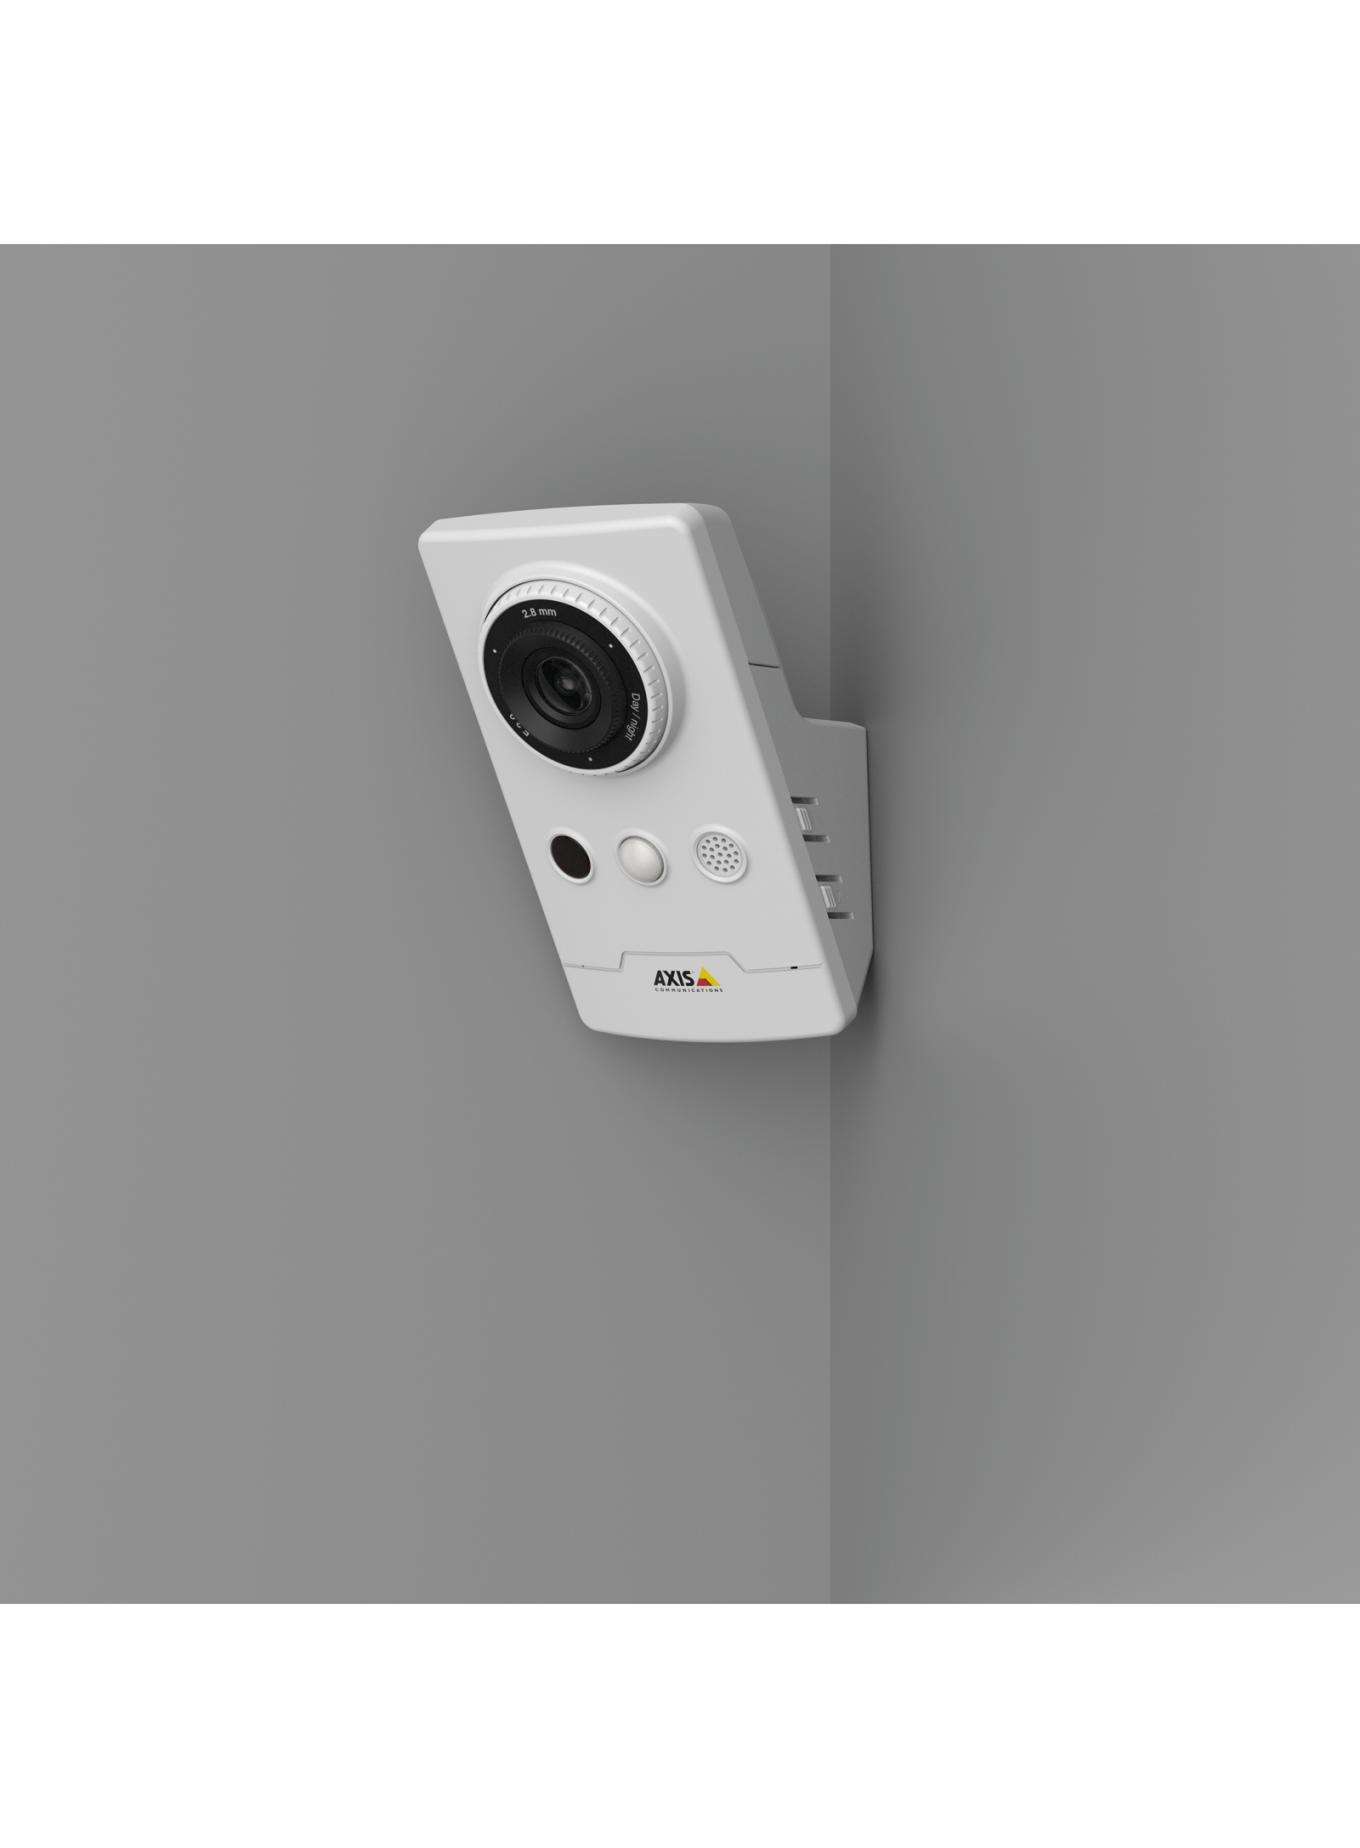 AXIS M1065-LW IP Camera mounted on a grey wall in the corner